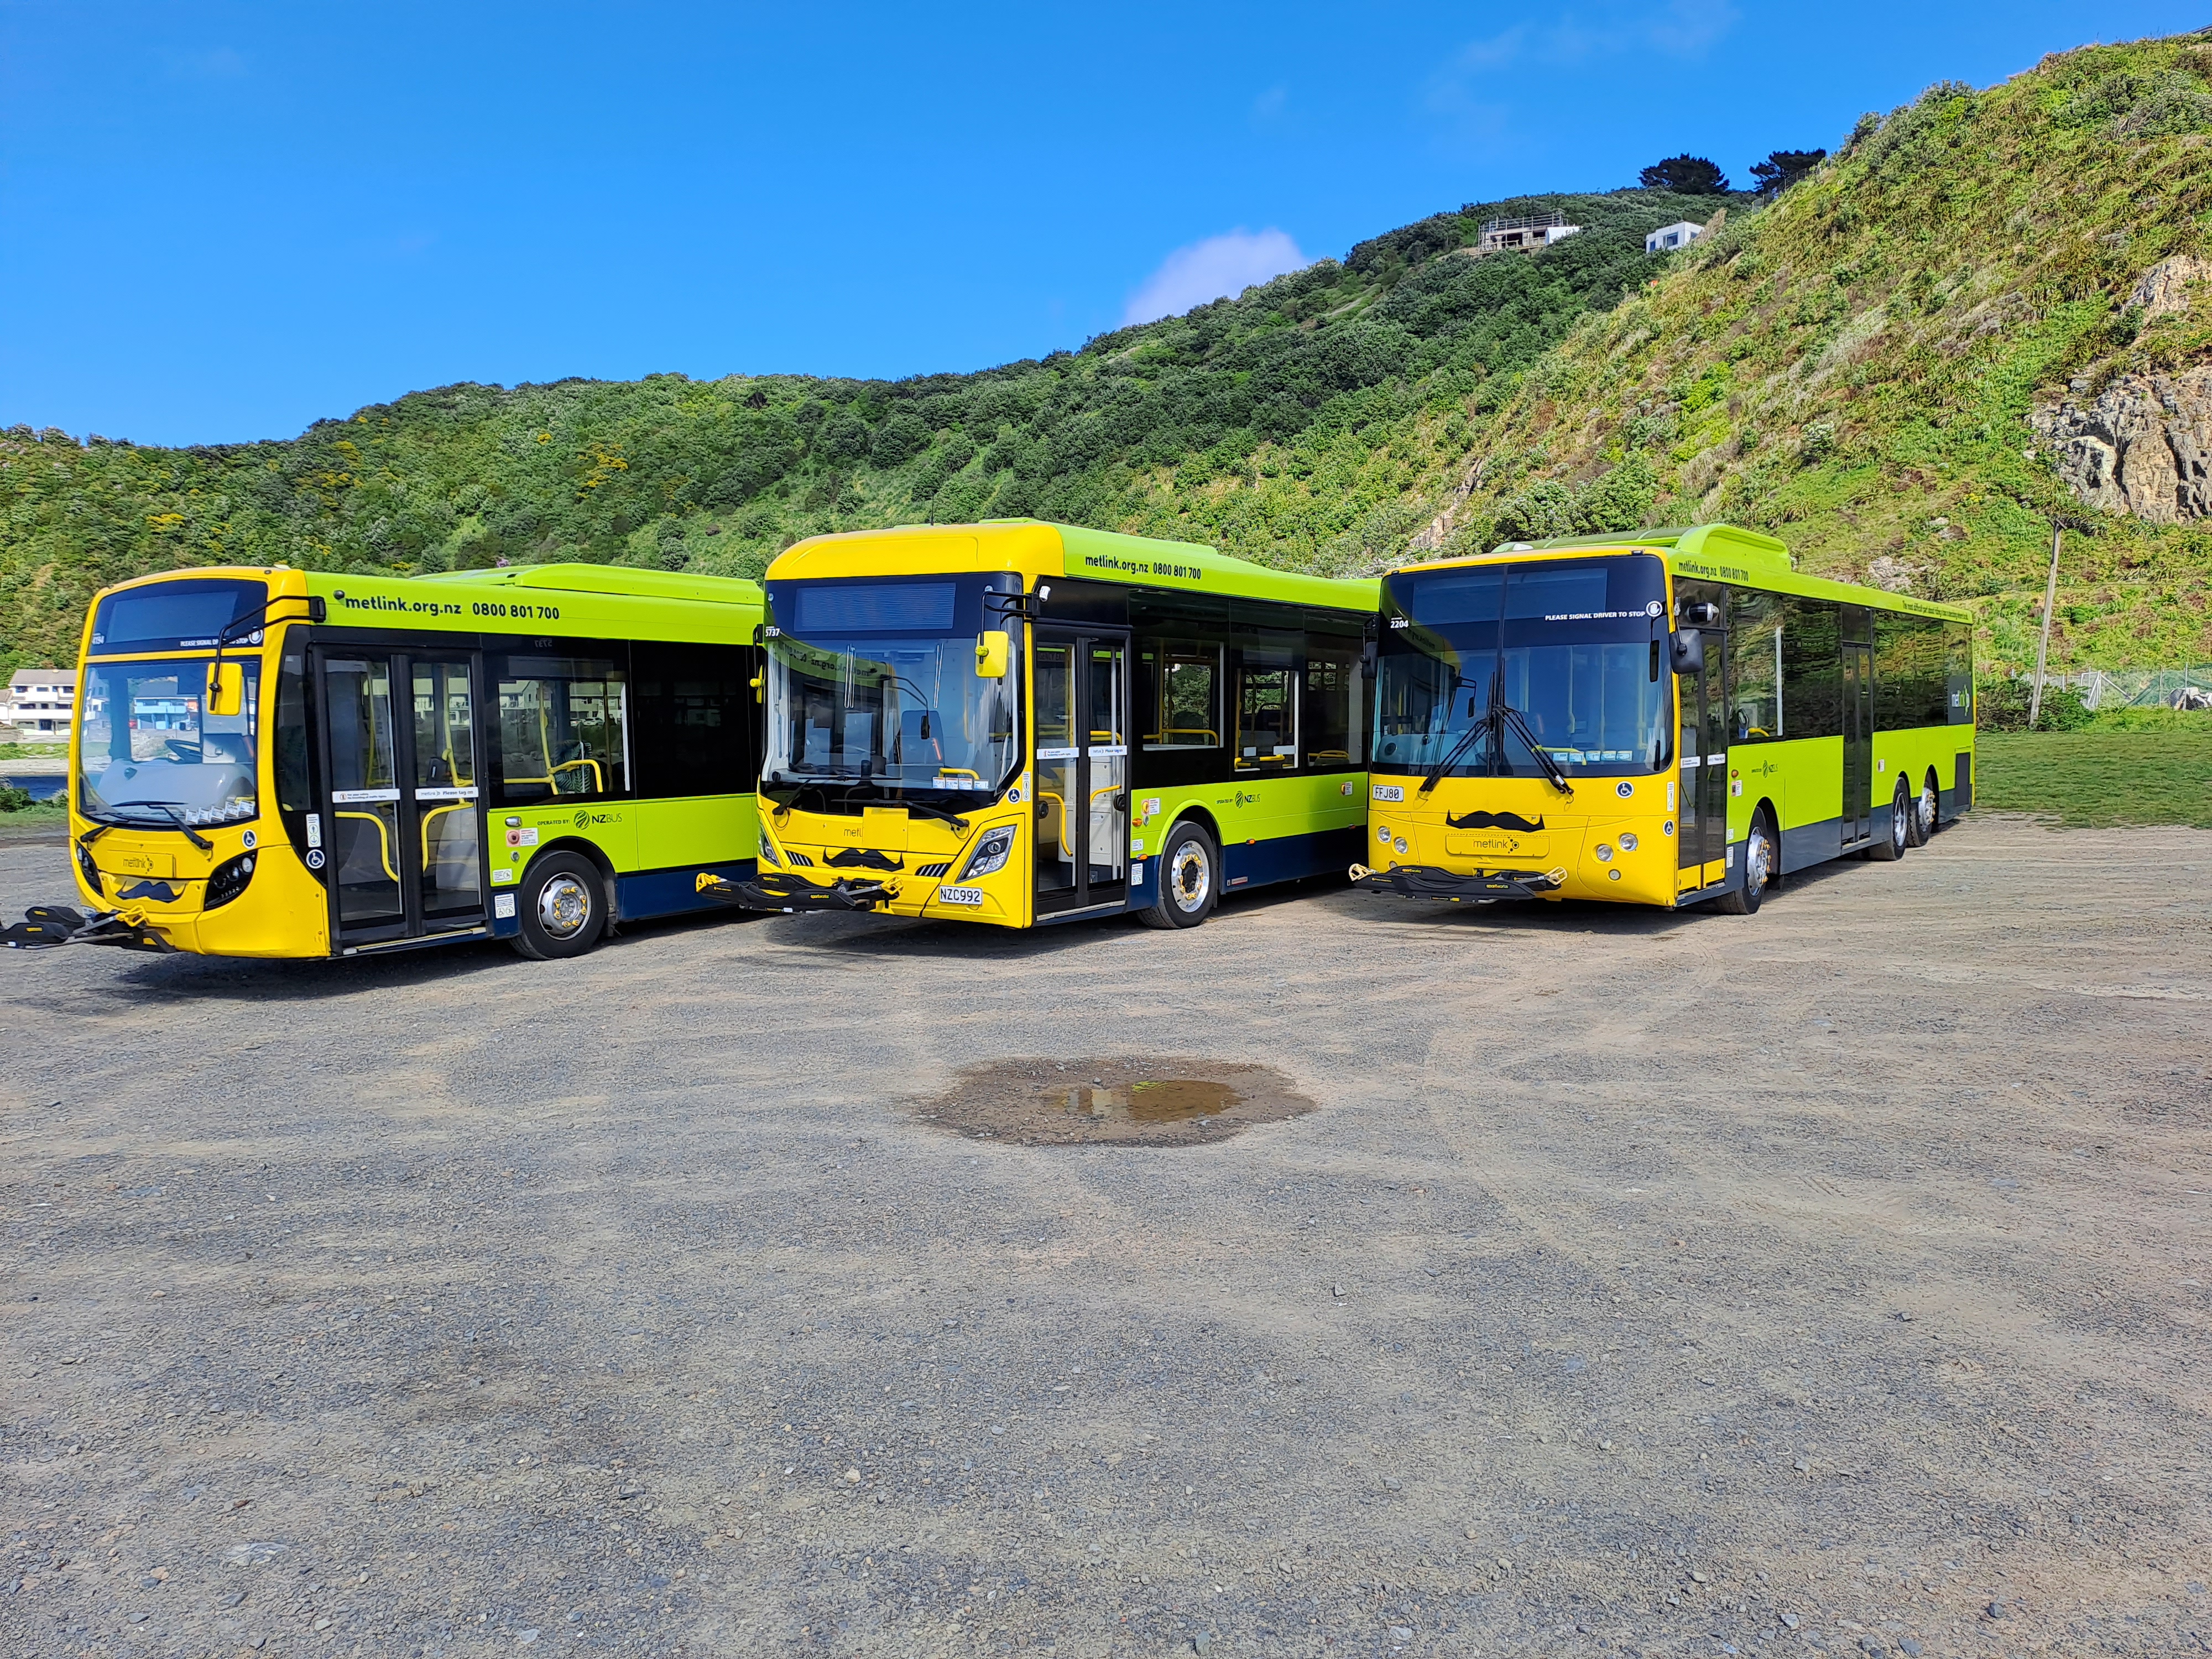 Three Metlink buses with moustaches on their front